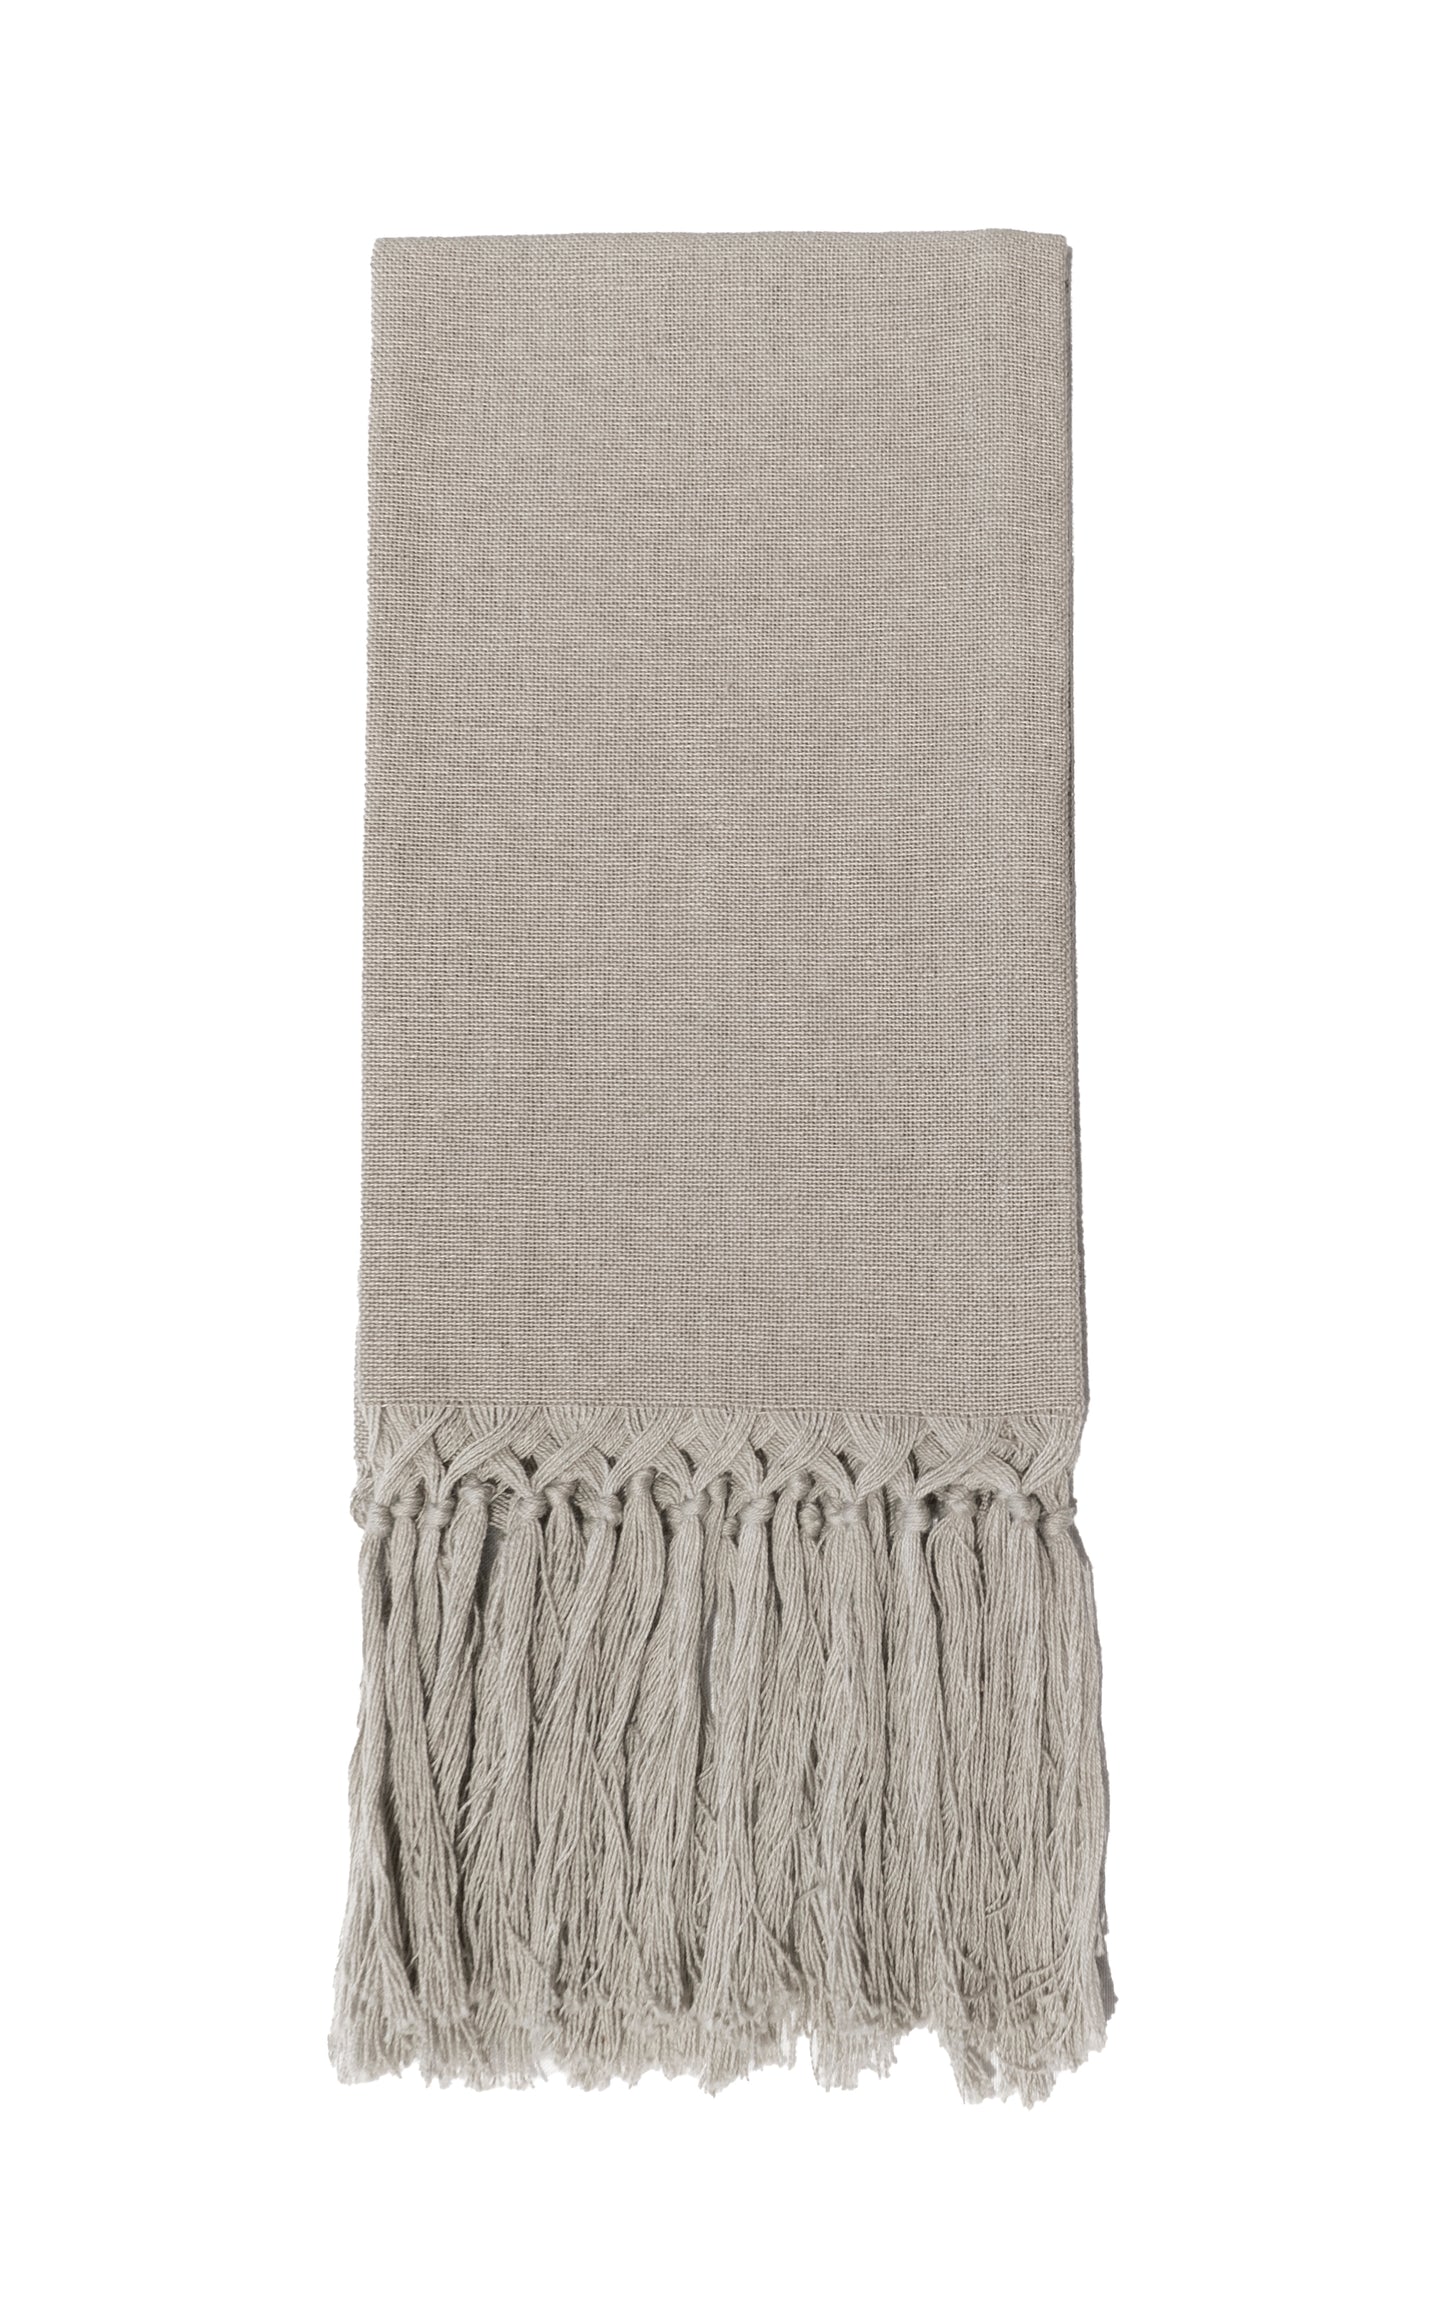 Fringed and Weaved Towels